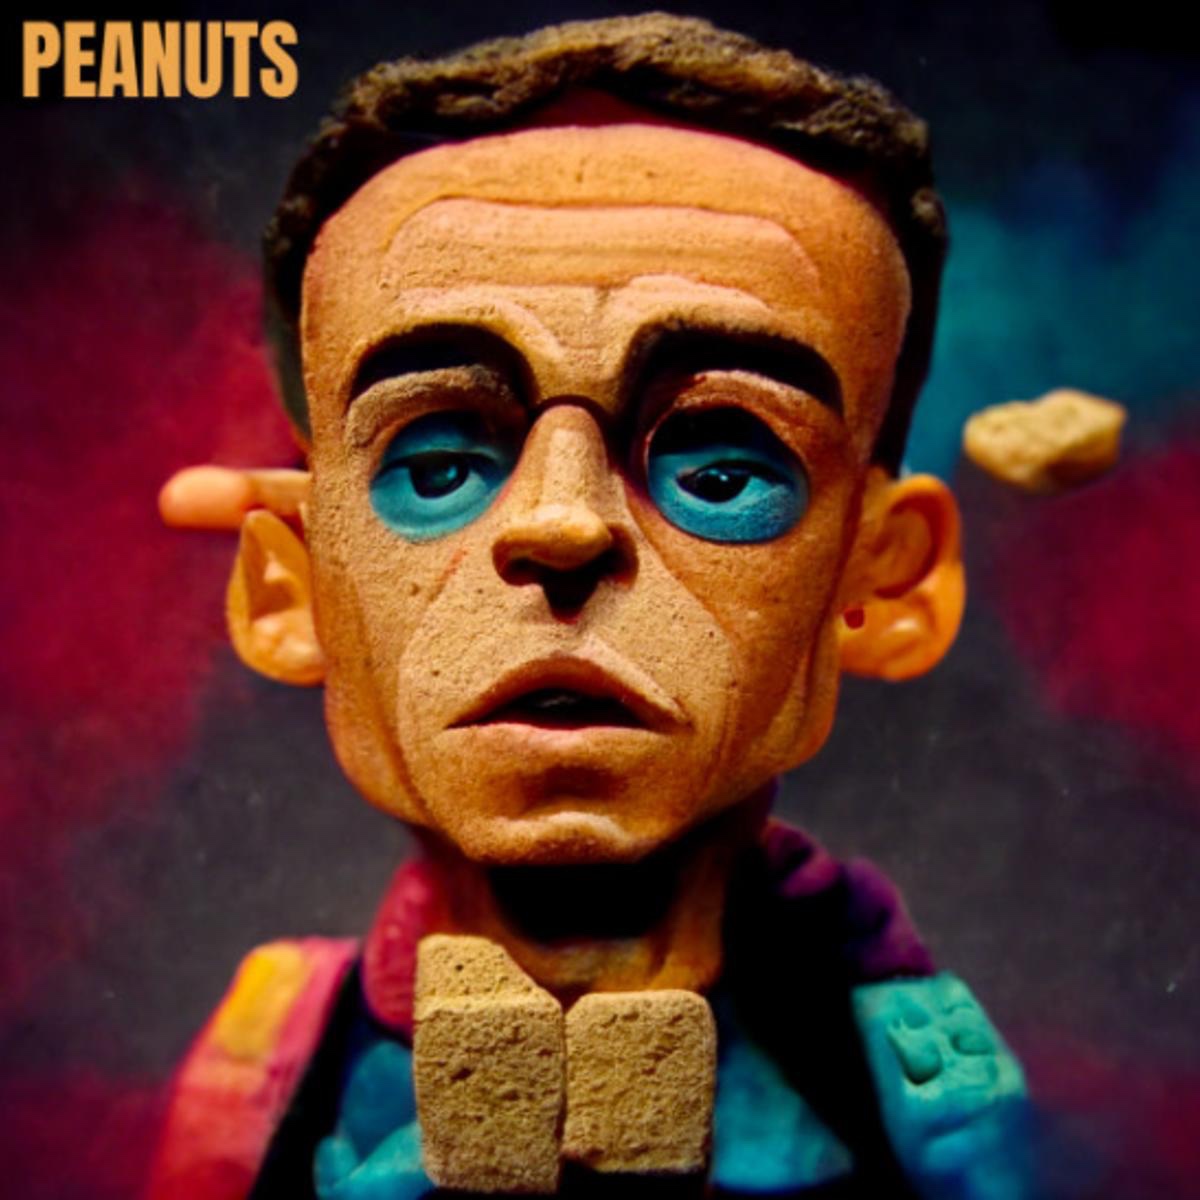 Listen To “Peanuts” By Logic